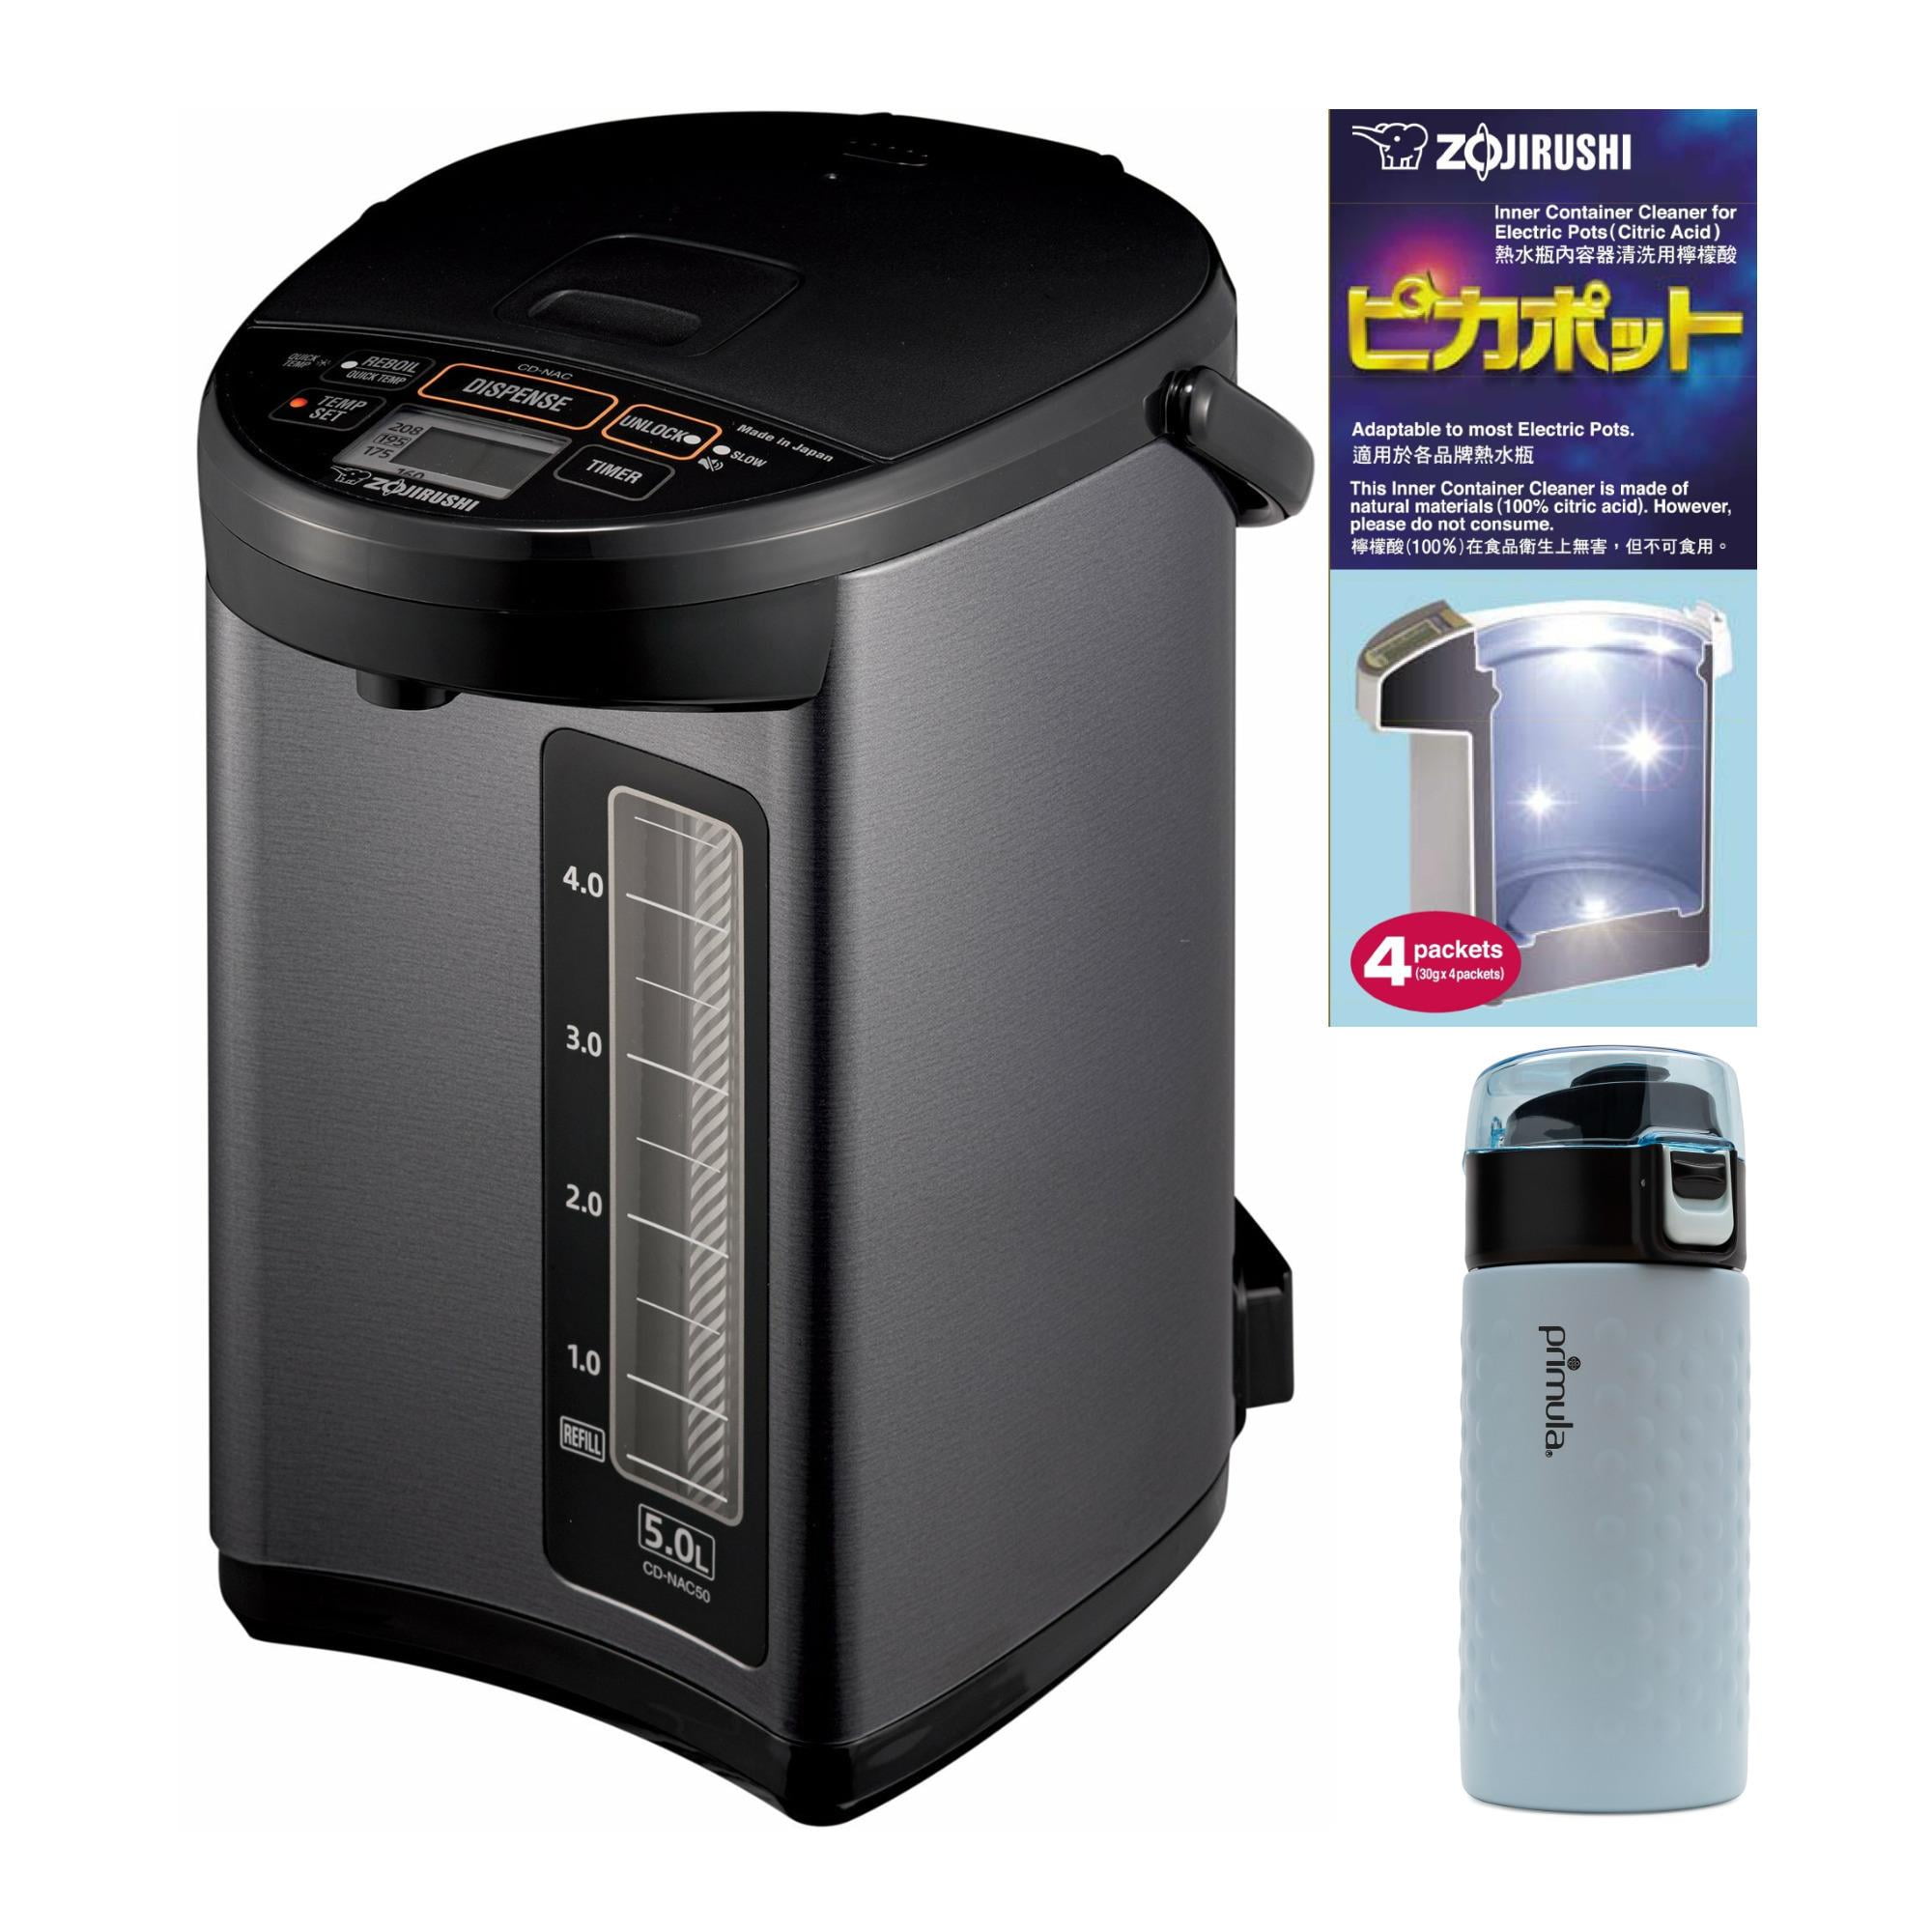 How to clean an electric water warmer